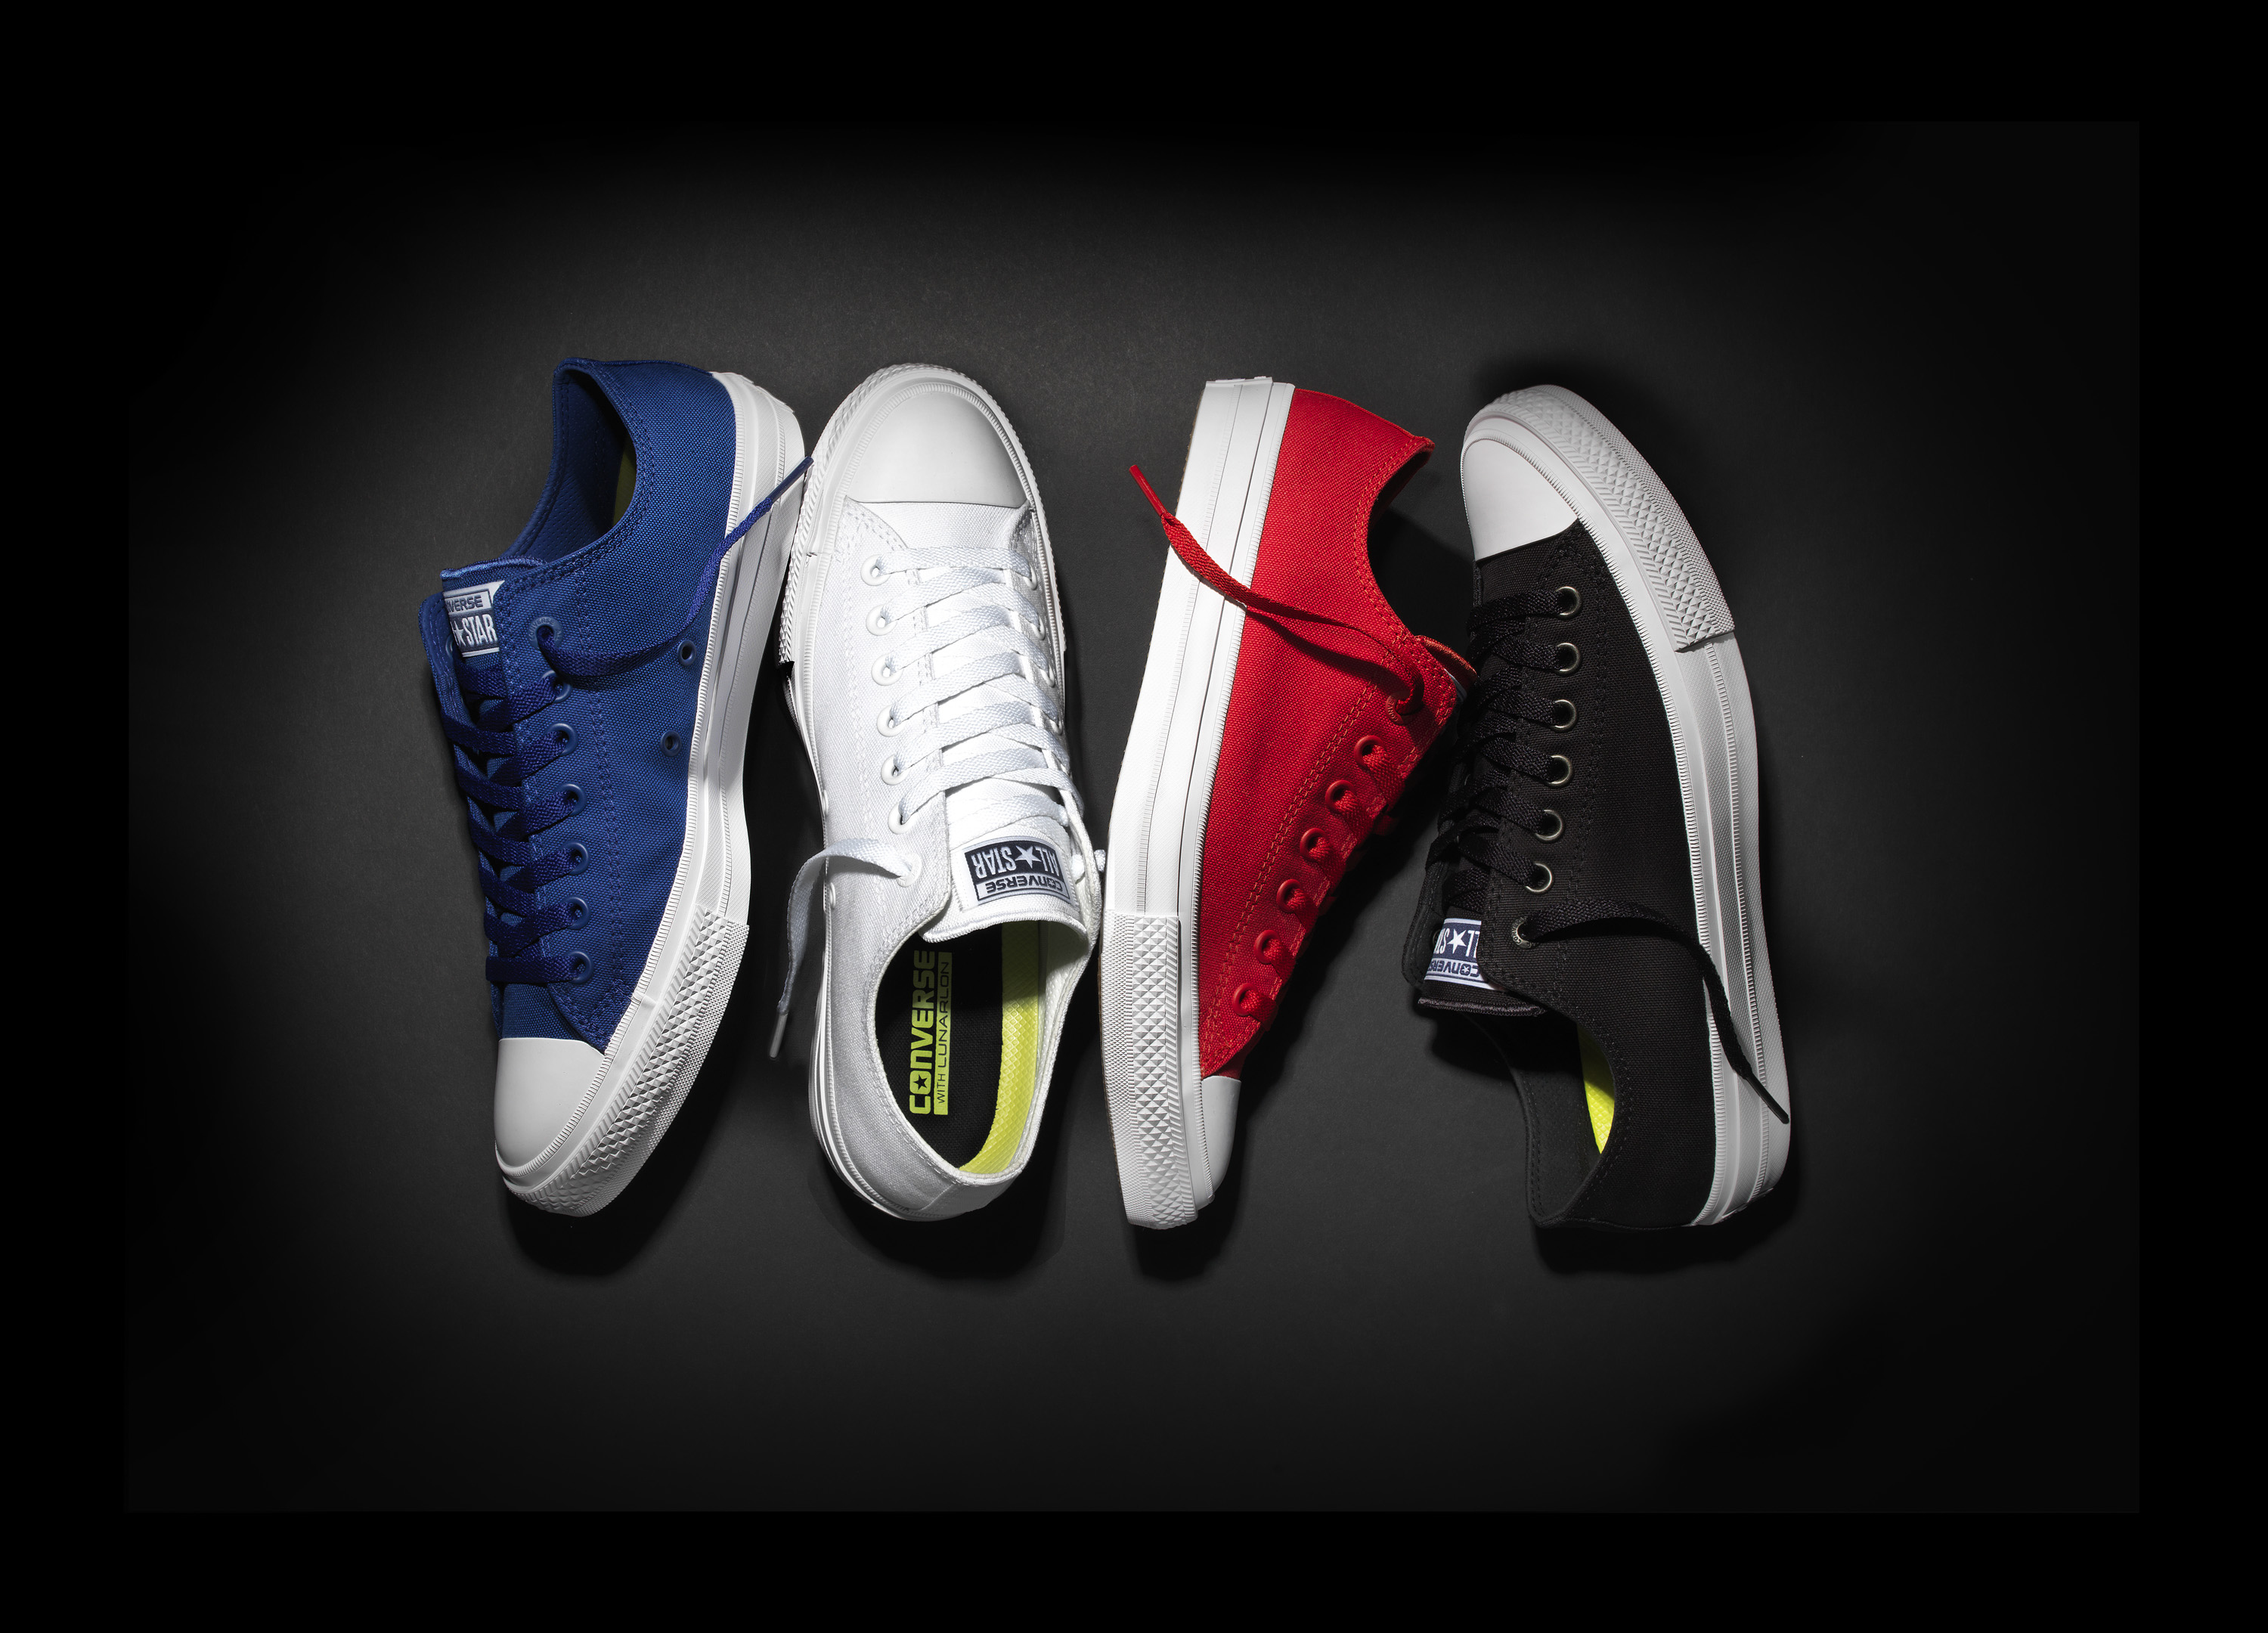 The new Fall 2015 Chuck Taylor All Star II sneaker in blue, white, red and black. (Converse via AP)